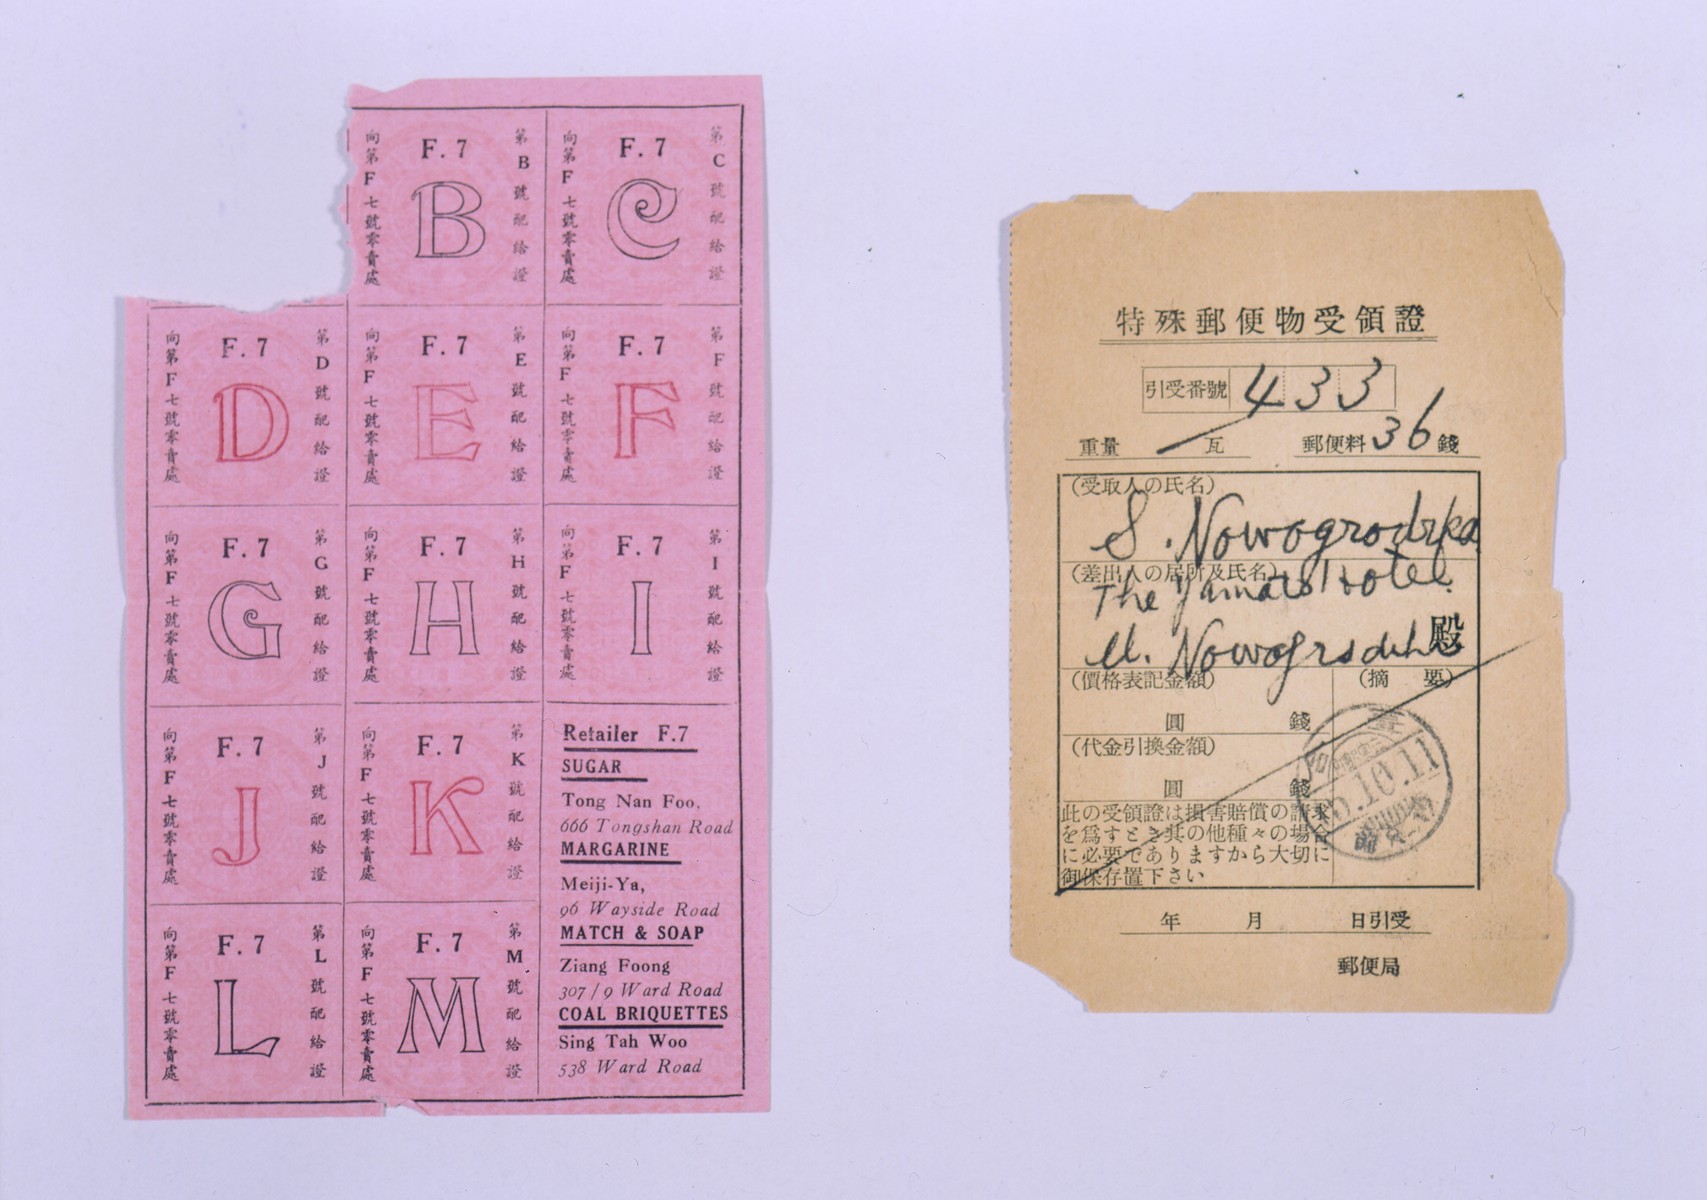 Composite photograph of two documents from the Shanghai ghetto:

1. Ration card for the Shanghai ghetto (left).
2. A receipt for a package sent from Shanghai to the mother of Marcus Nowogrodzki, who stayed behind in Warsaw when Marcus fled to Shanghai (right).